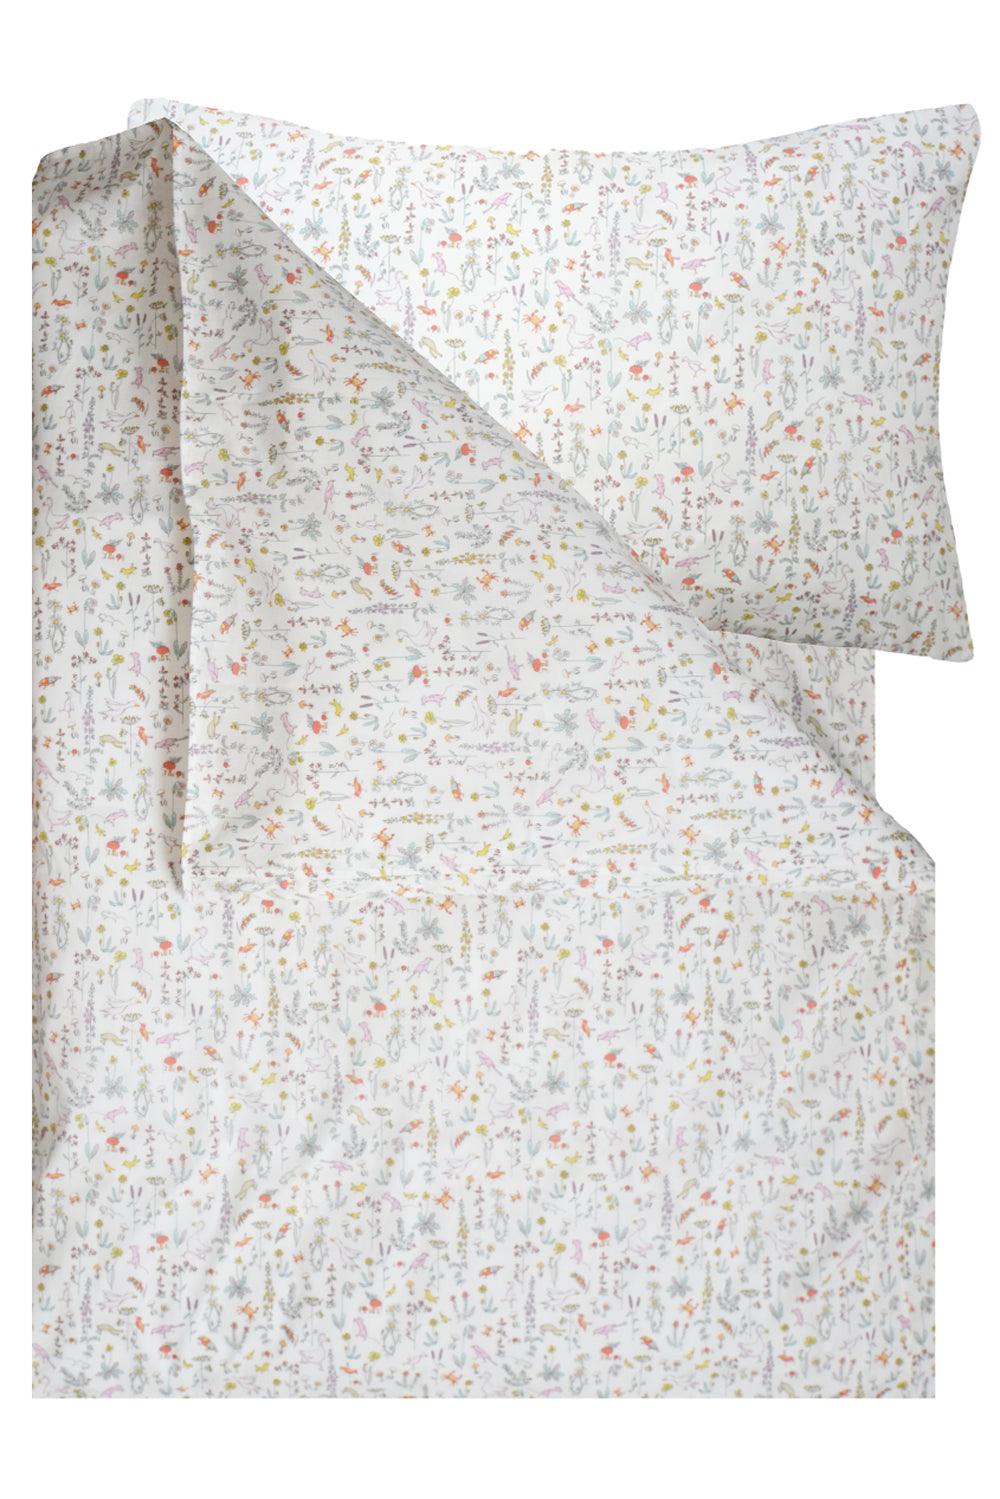 Bedding made with Liberty Fabric THEO PINK - Coco & Wolf